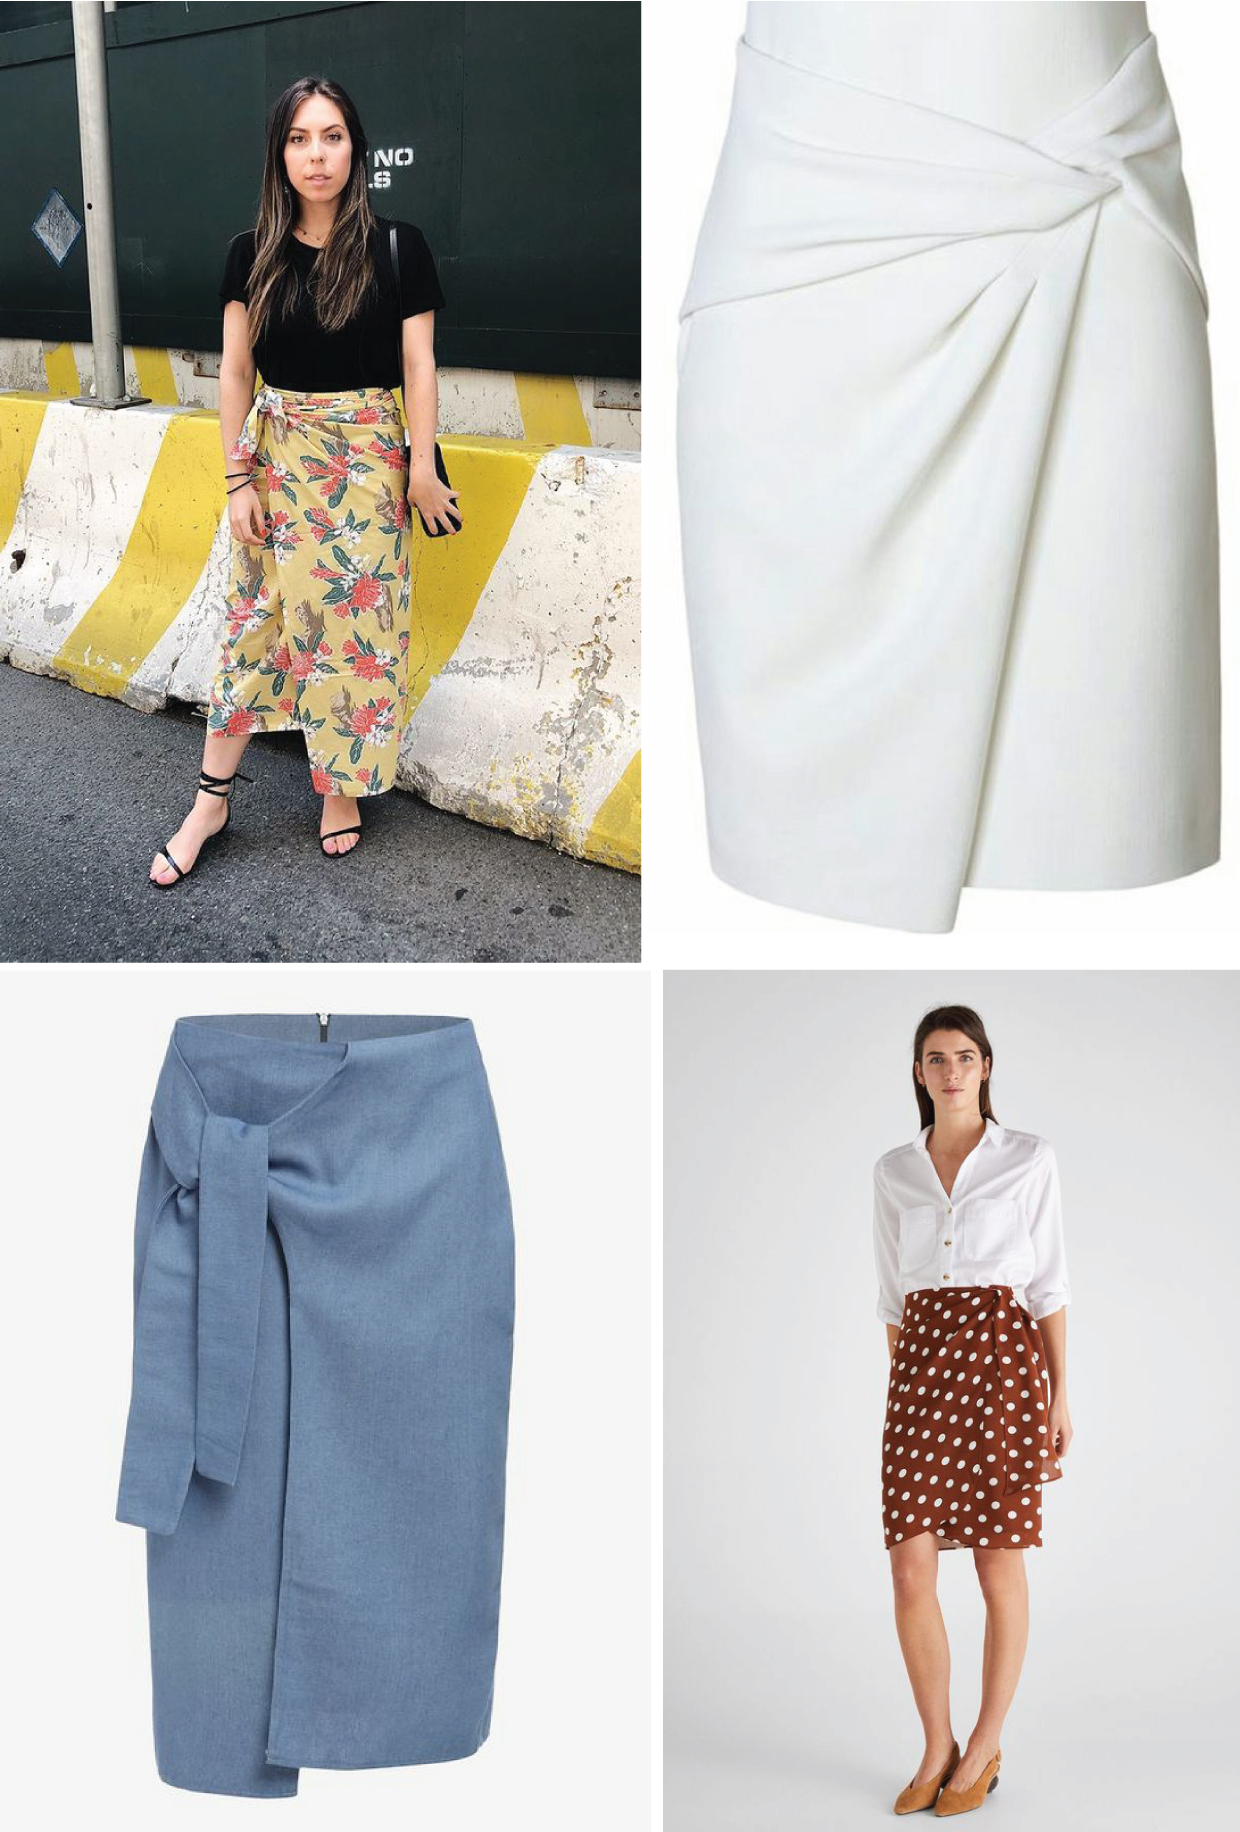 Fabric and Styling Inspiration for the Kensington Knit Skirt | Blog ...